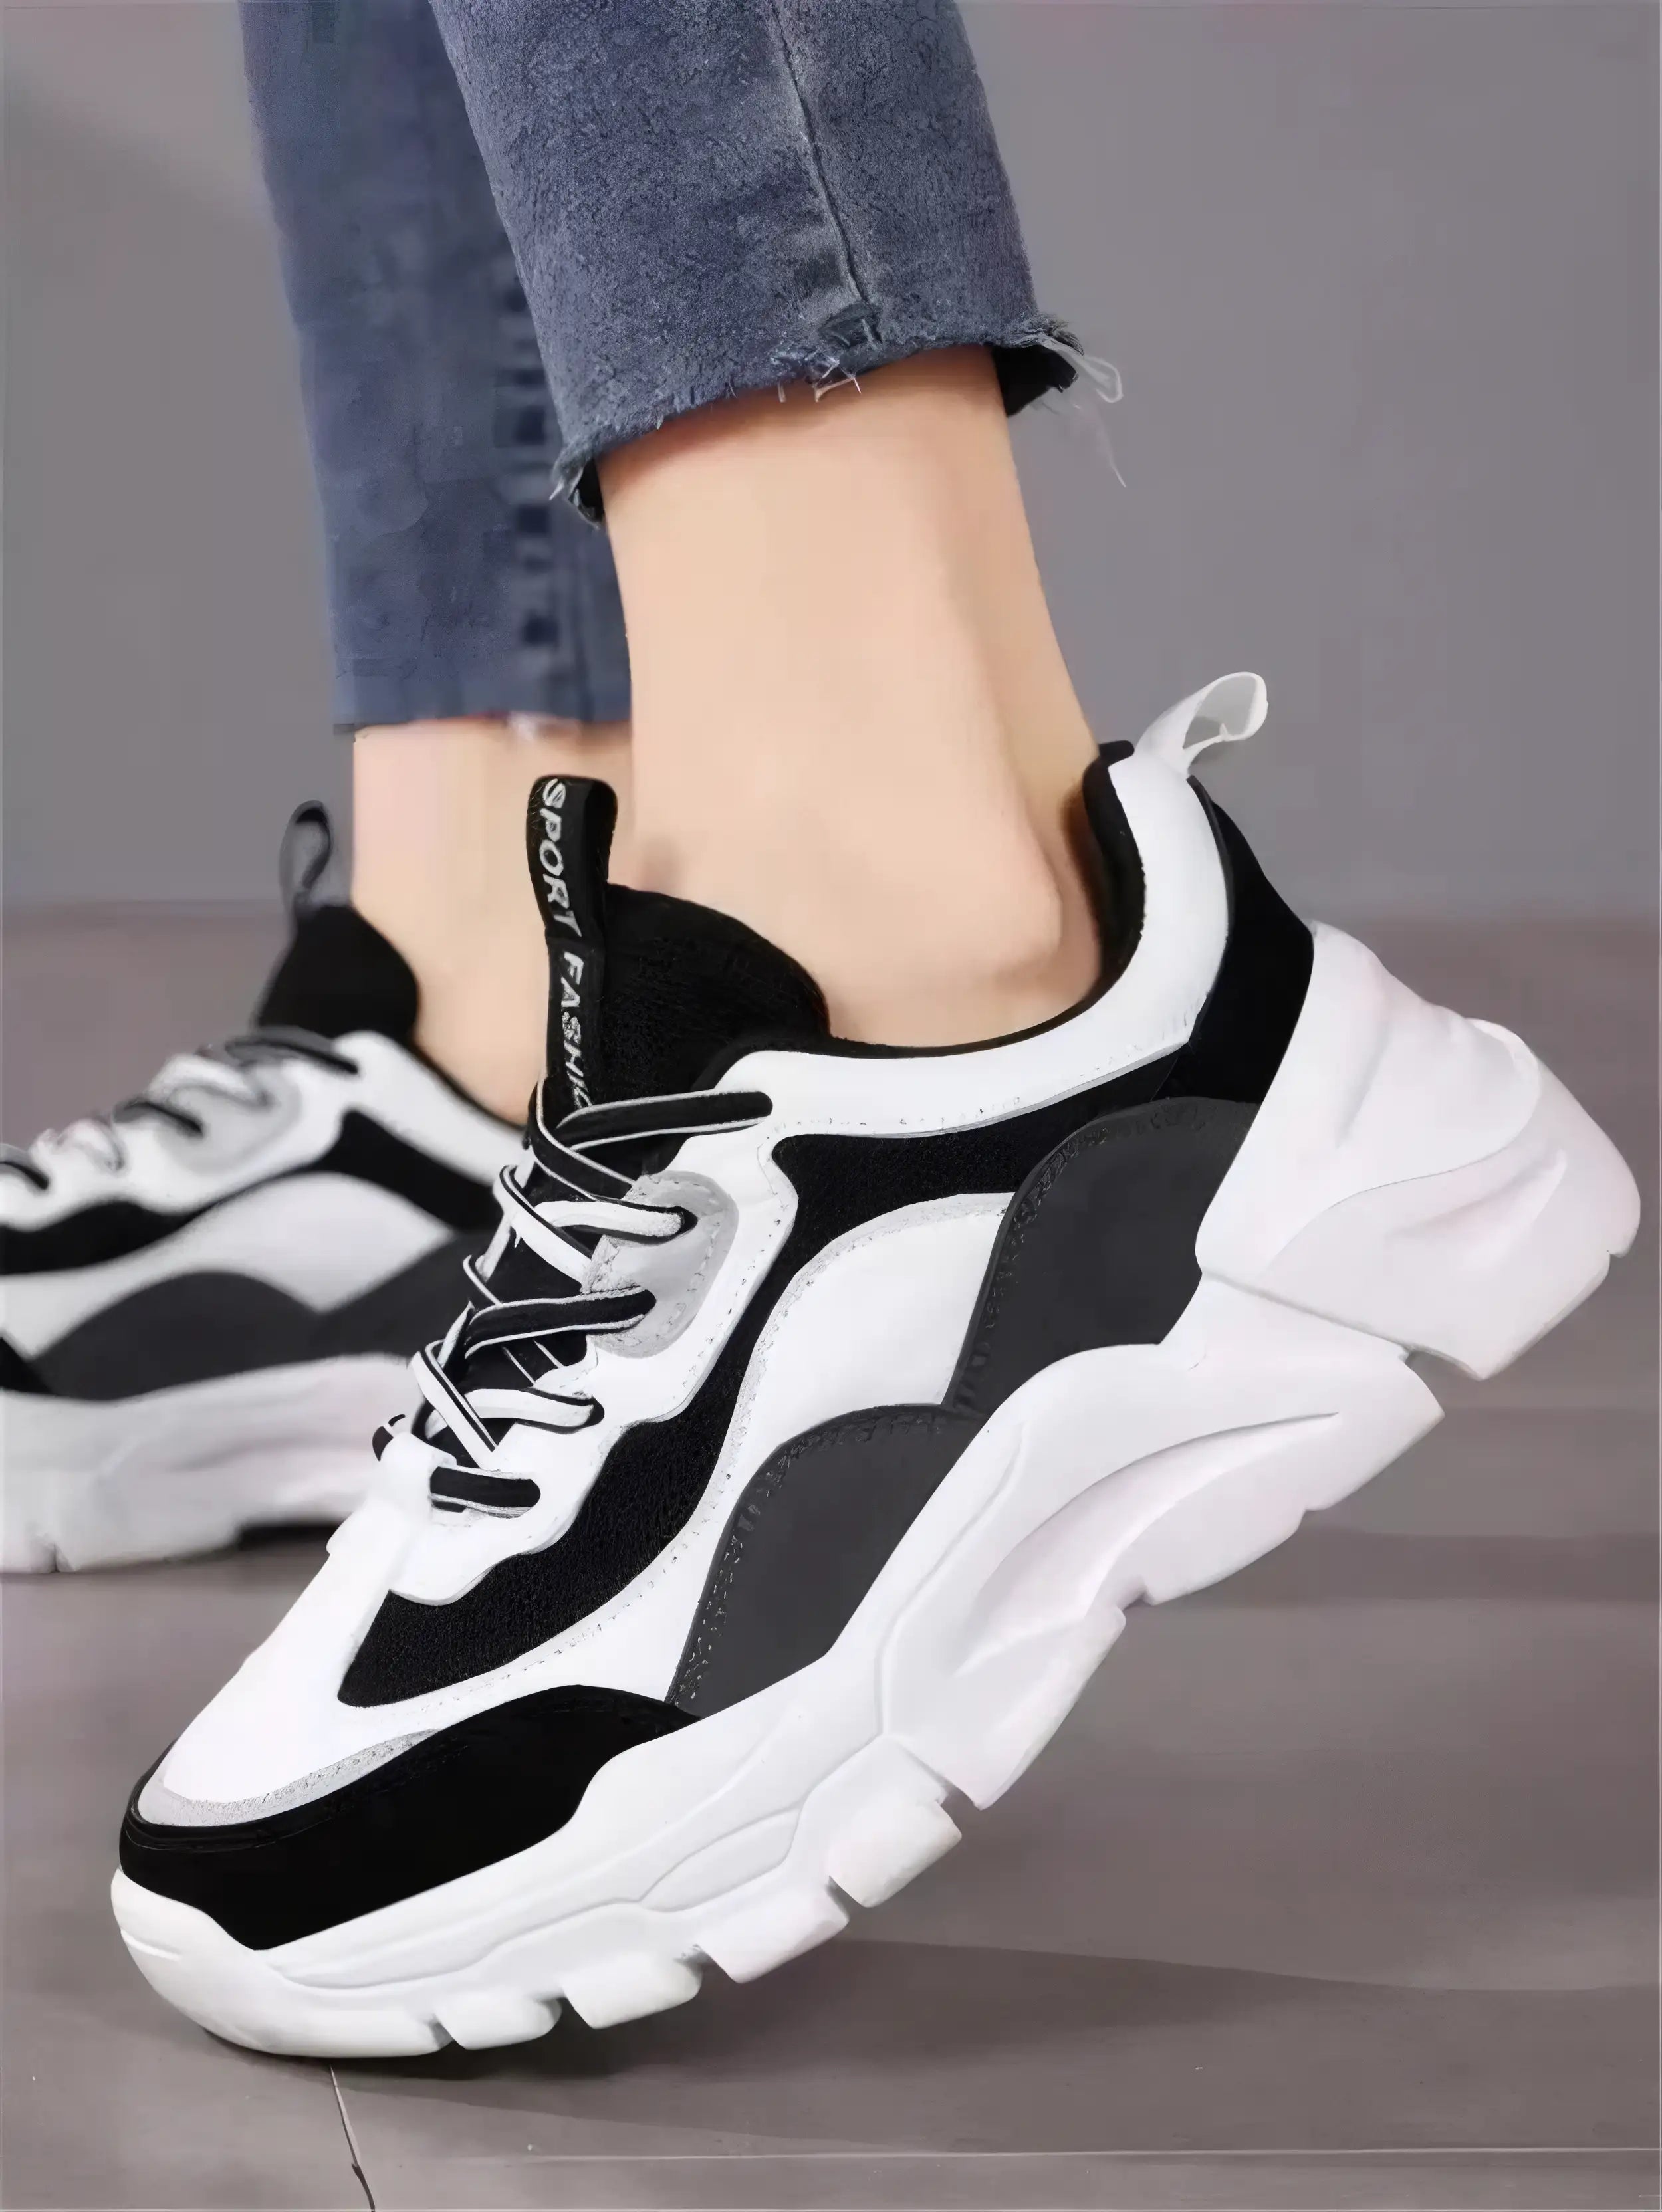 Women's White-Black Synthetic Leather Sneakers Shoes